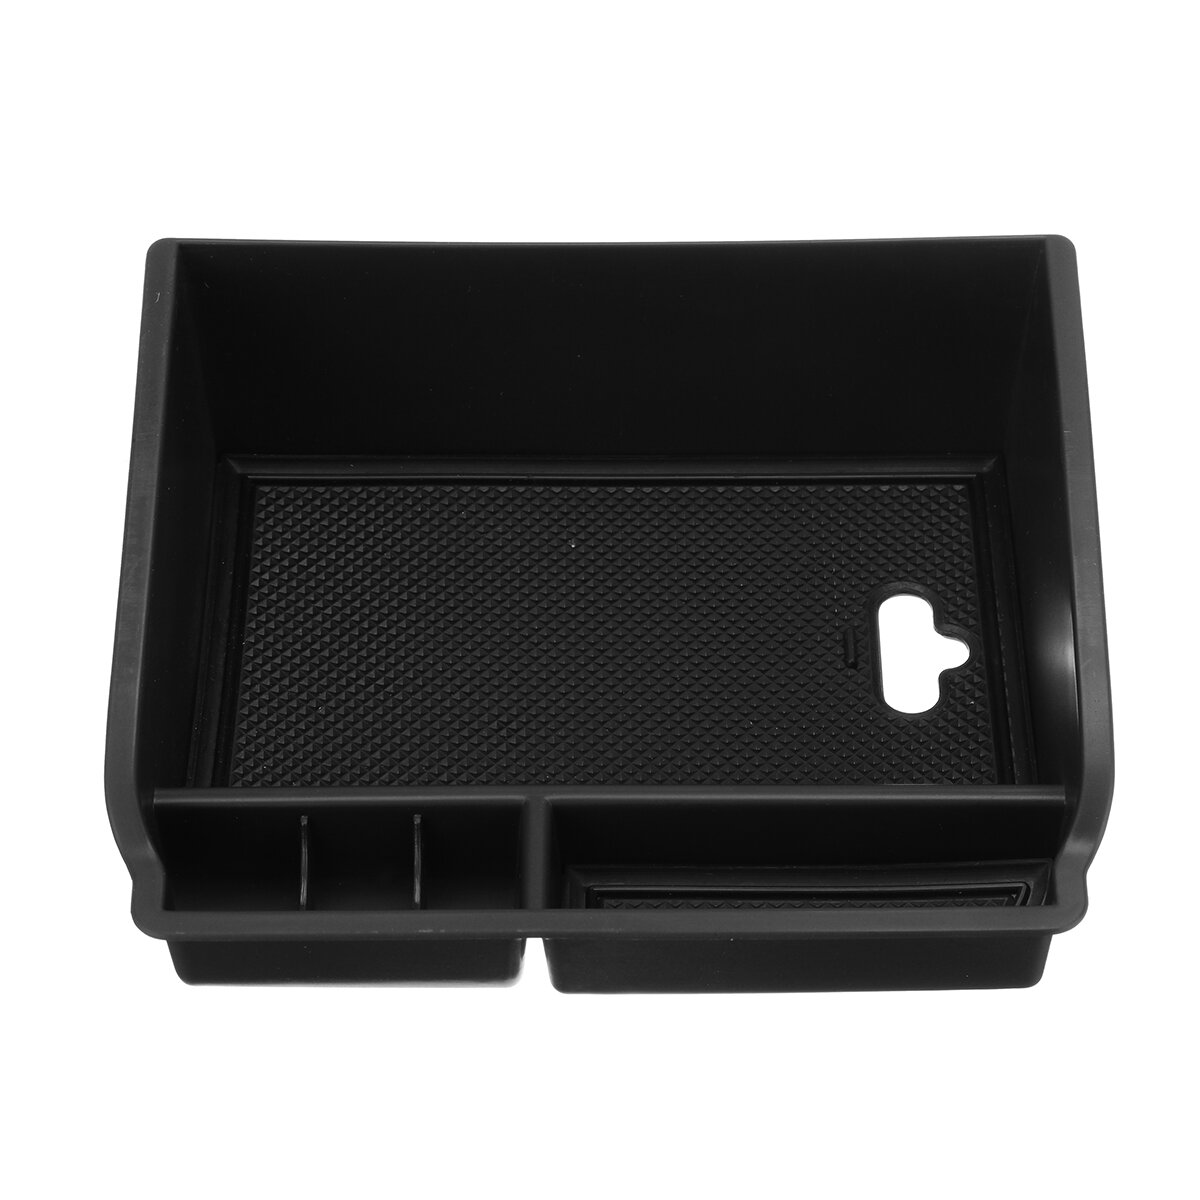 Auto Armsteun Middenconsole Box Organizer Houder Lade Voor Toyota Hilux AN120 130